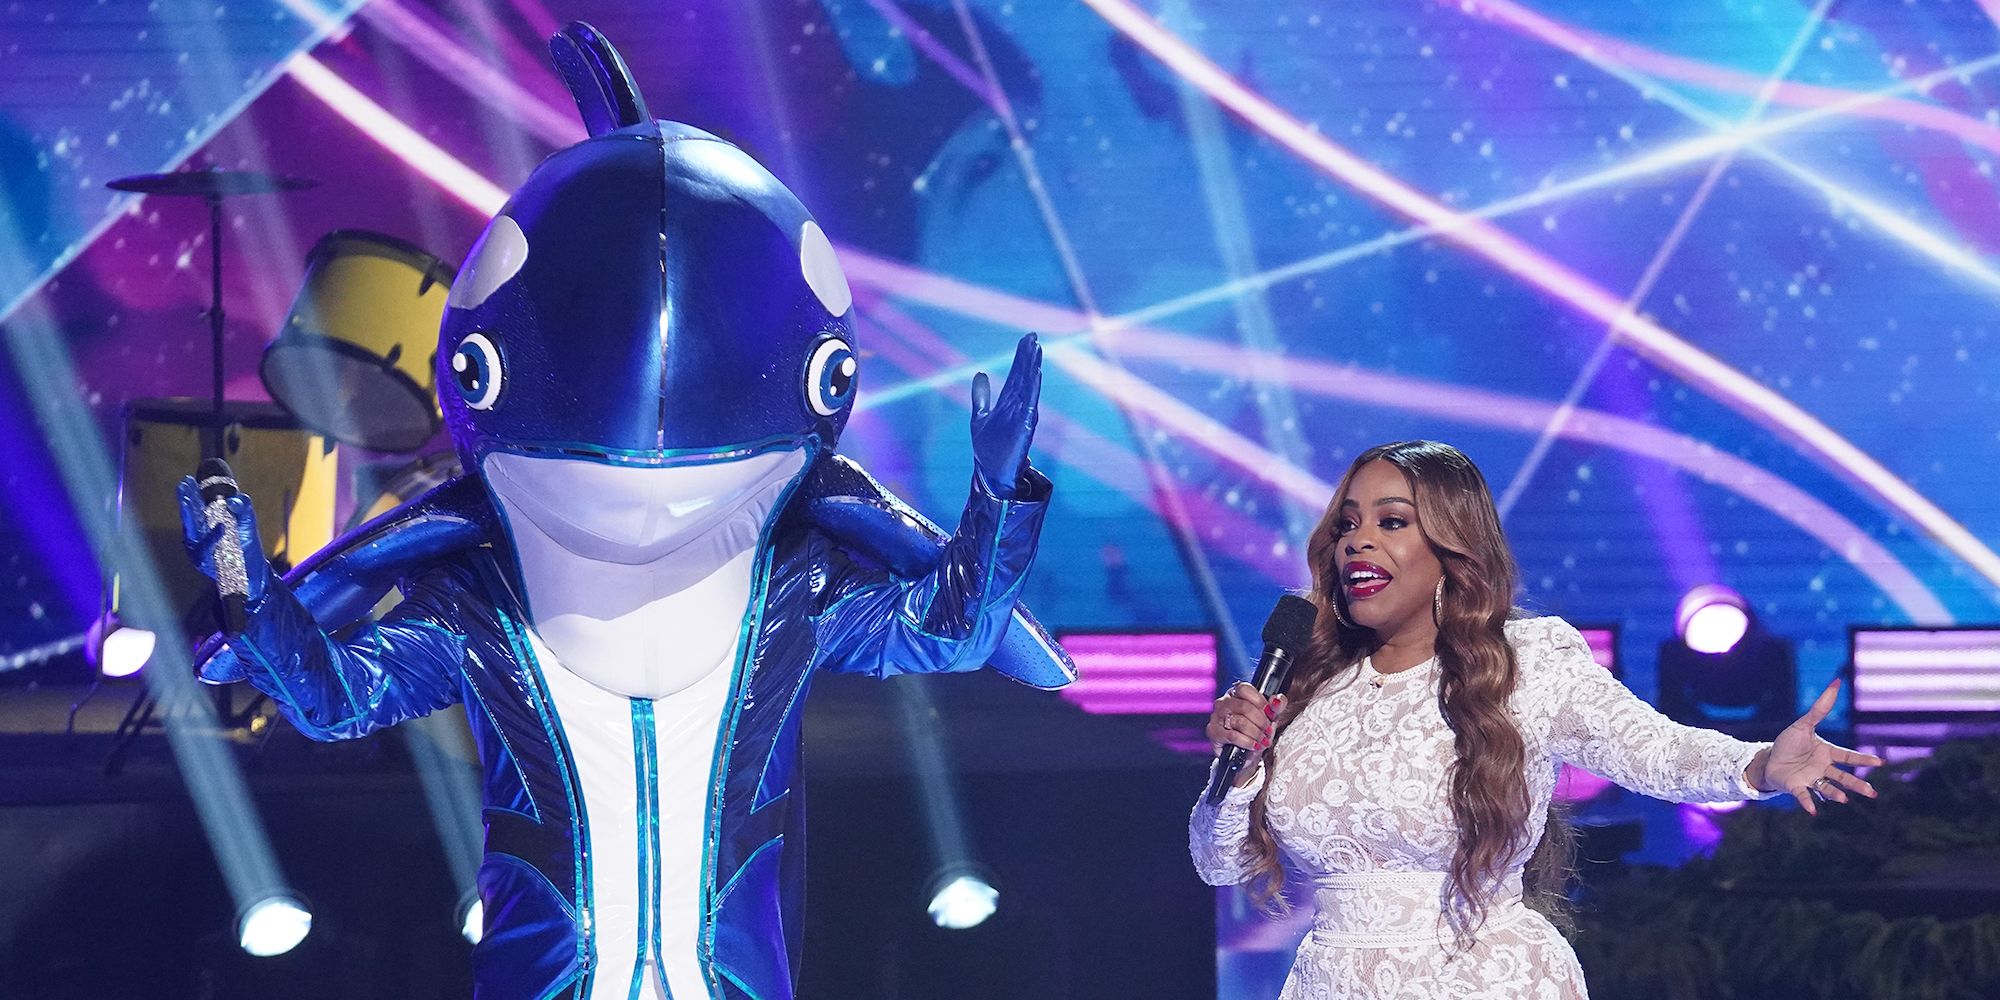 The Masked Singer season 5 Orca wildcard with Niecy Nash